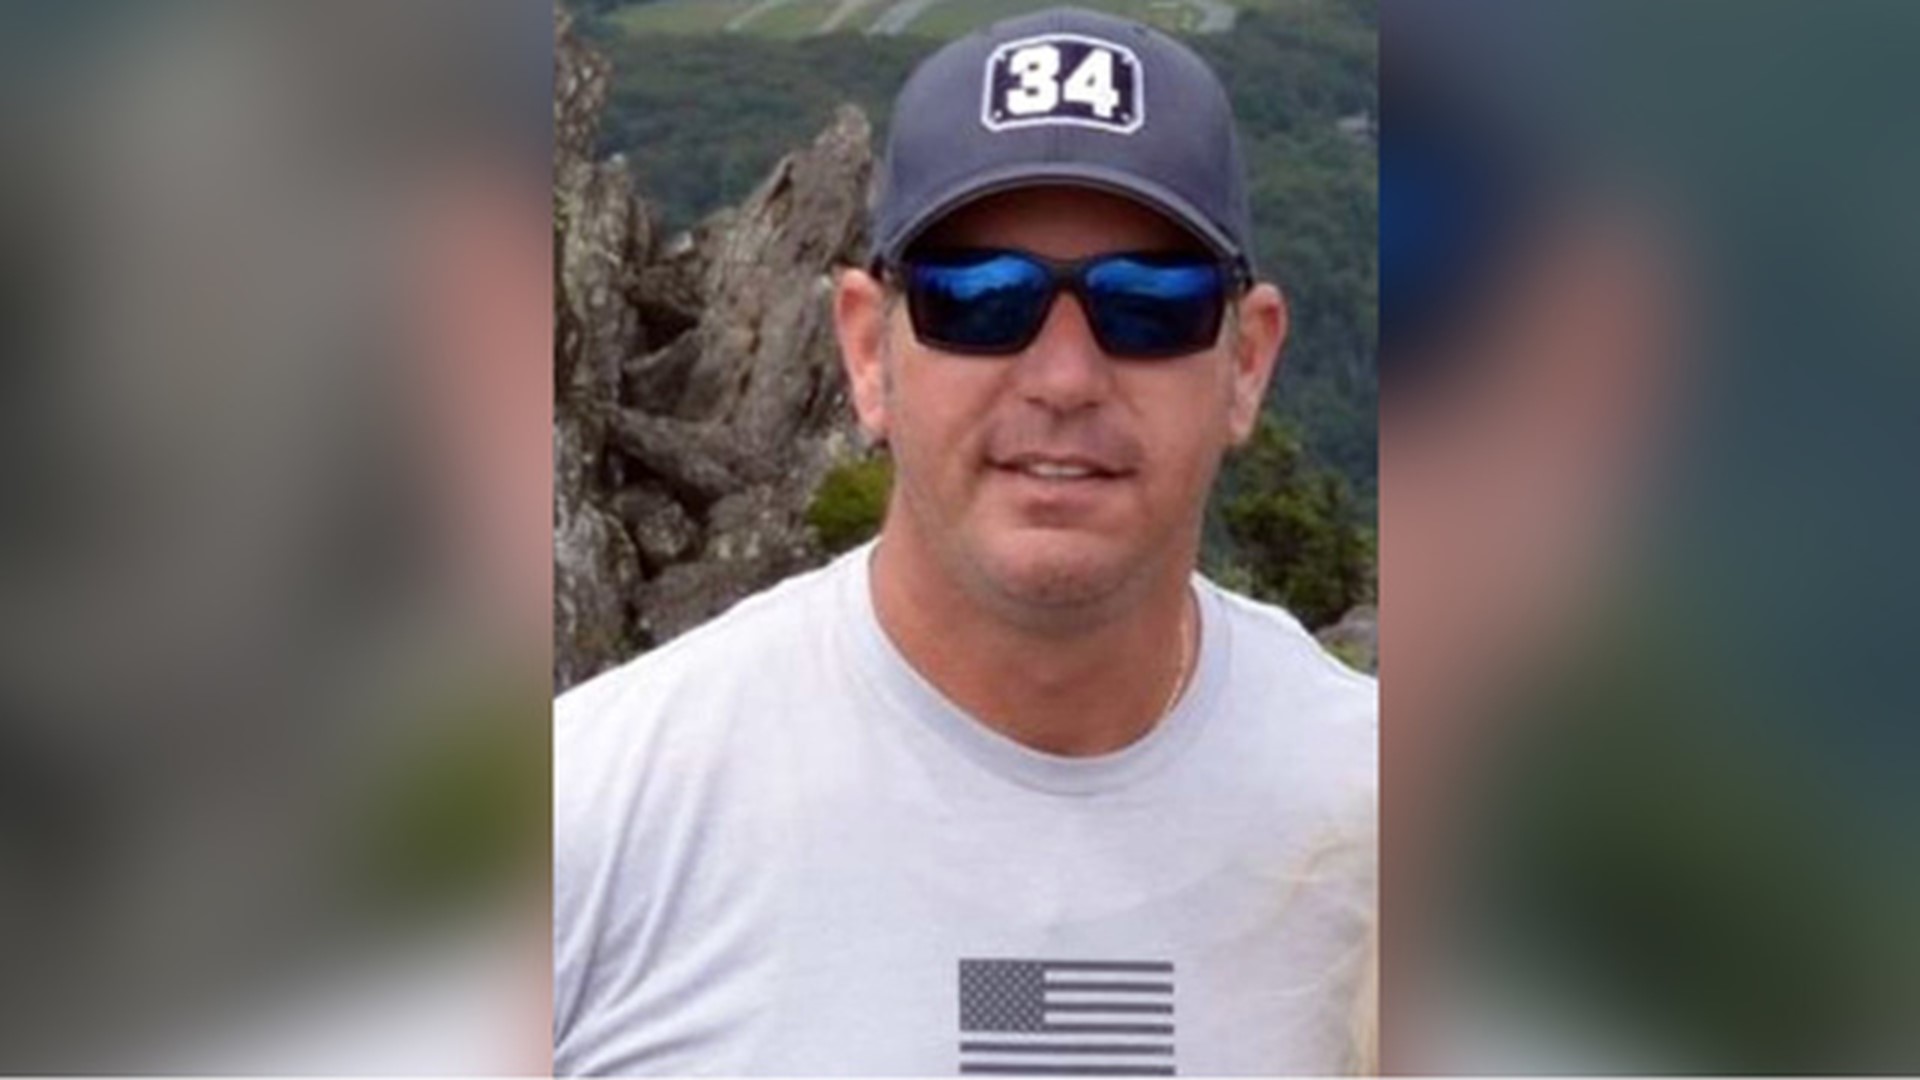 Adam Snyder was a 20-year veteran of the Atlantic Beach. He had been chief for 15 years. He was also a United States Marine Corps veteran where he served as a Rescue Swimmer.